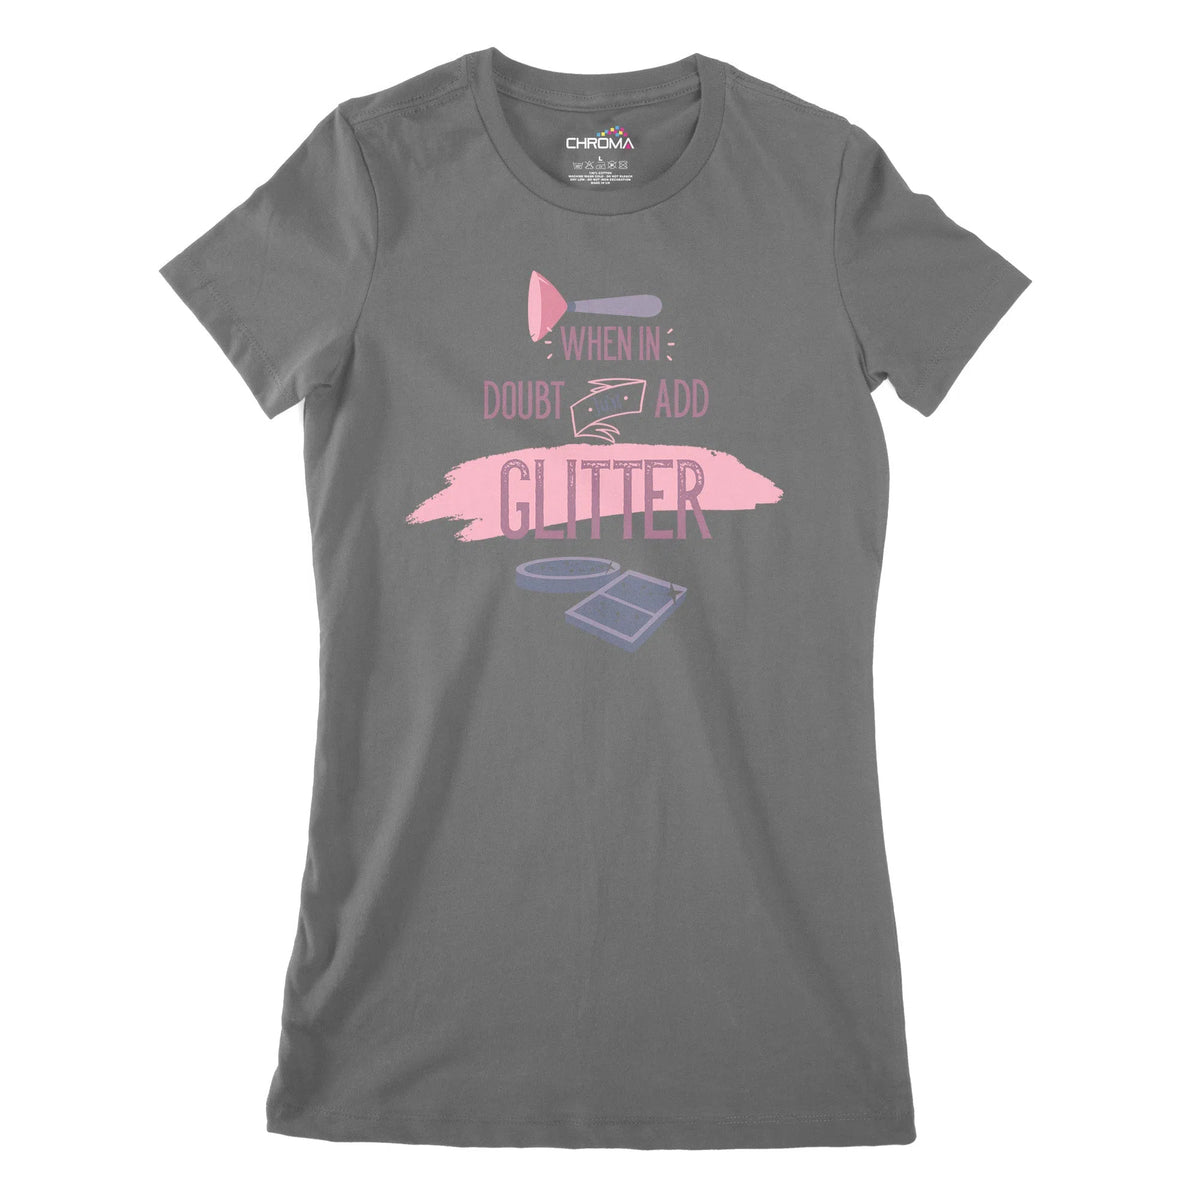 Add Glitter Women's Classic Fitted T-Shirt Chroma Clothing